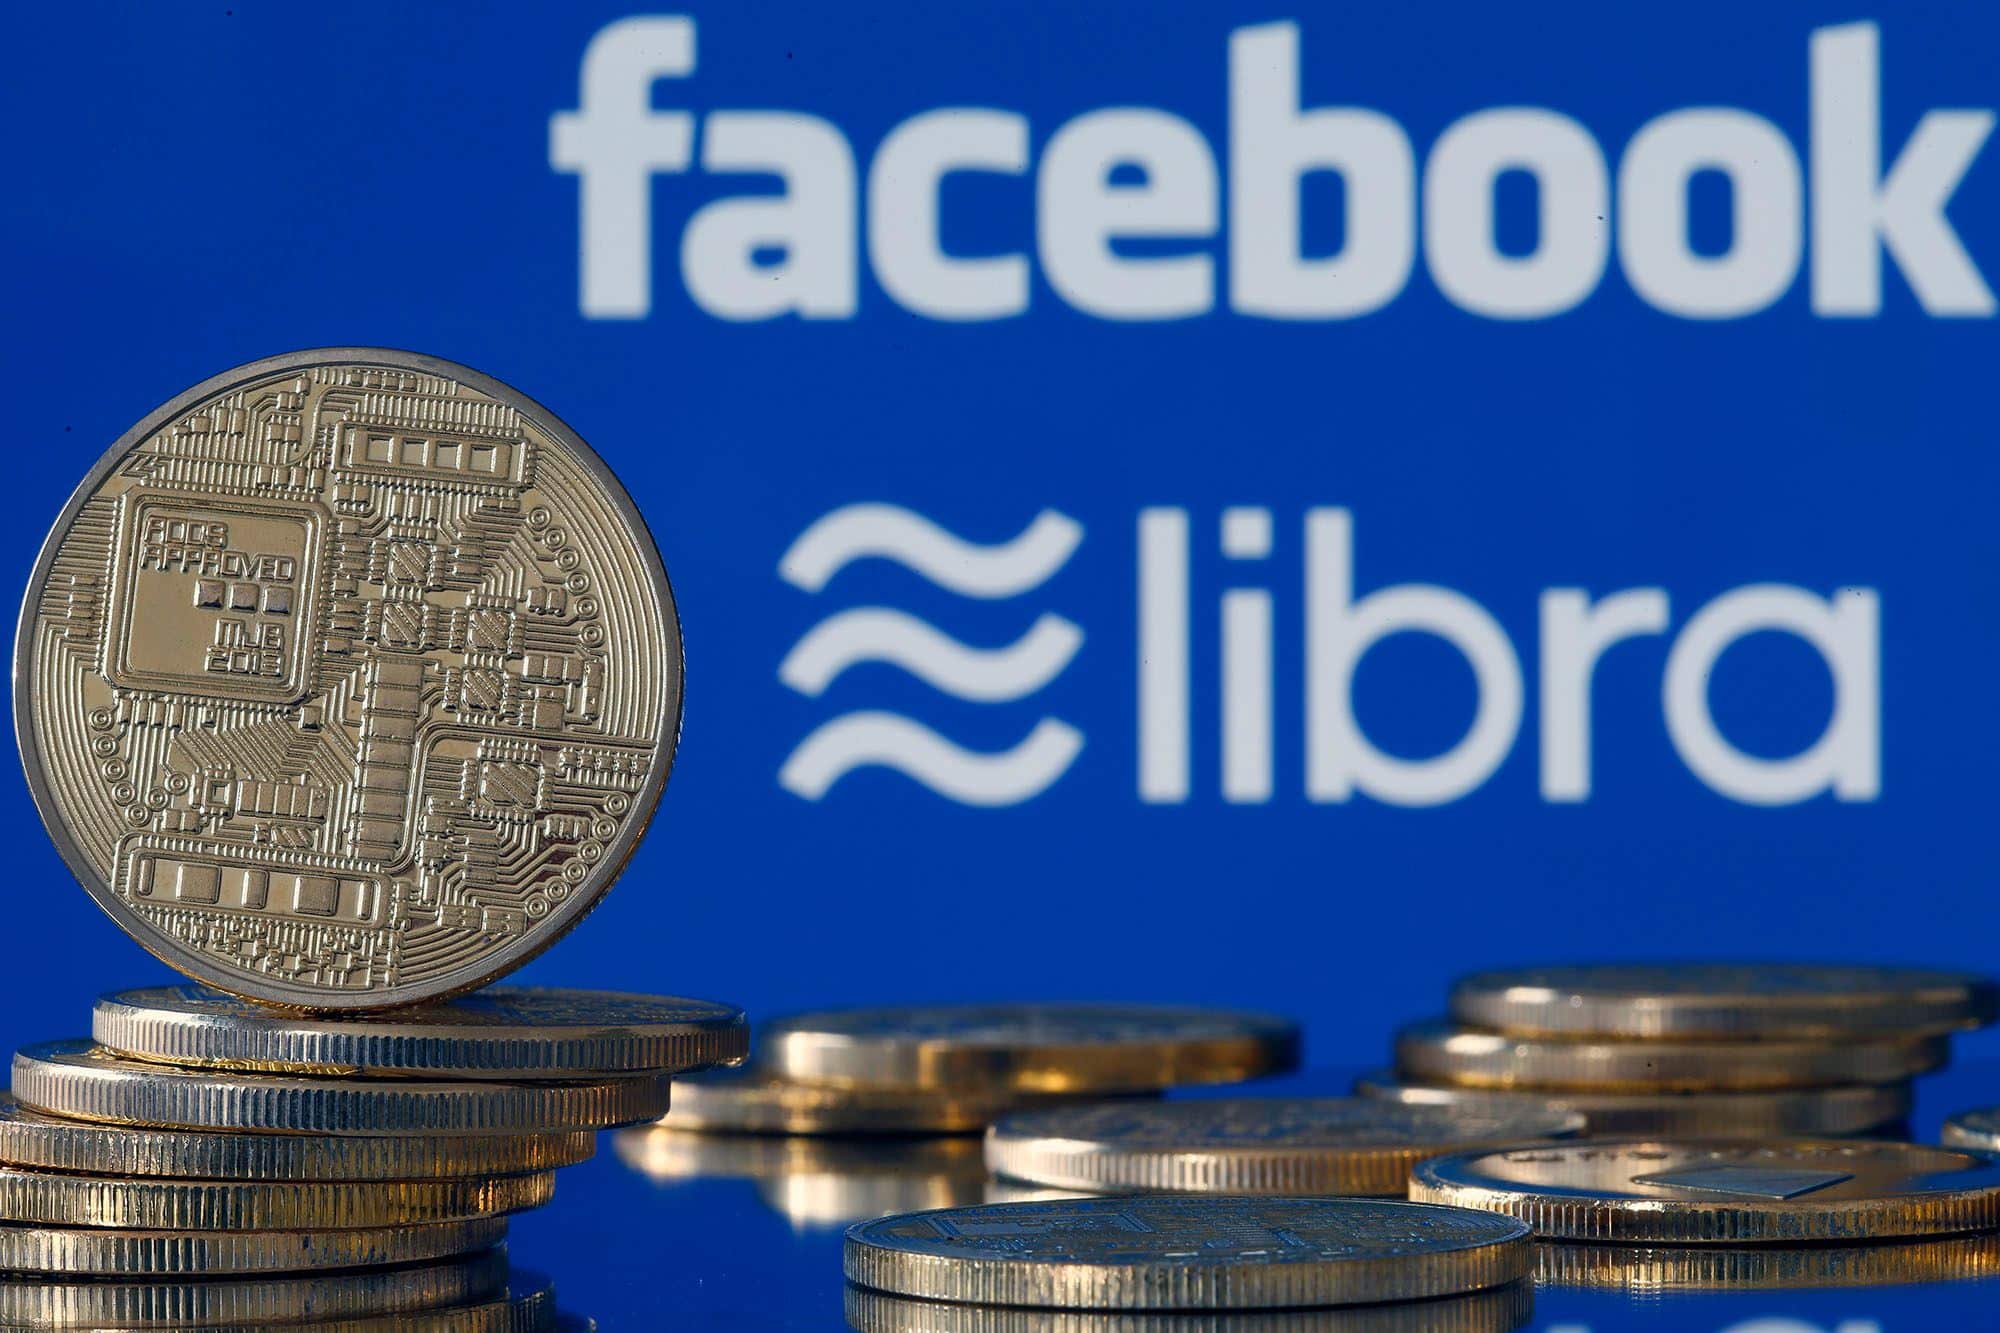 Introducing Facebook's Cryptocurrency